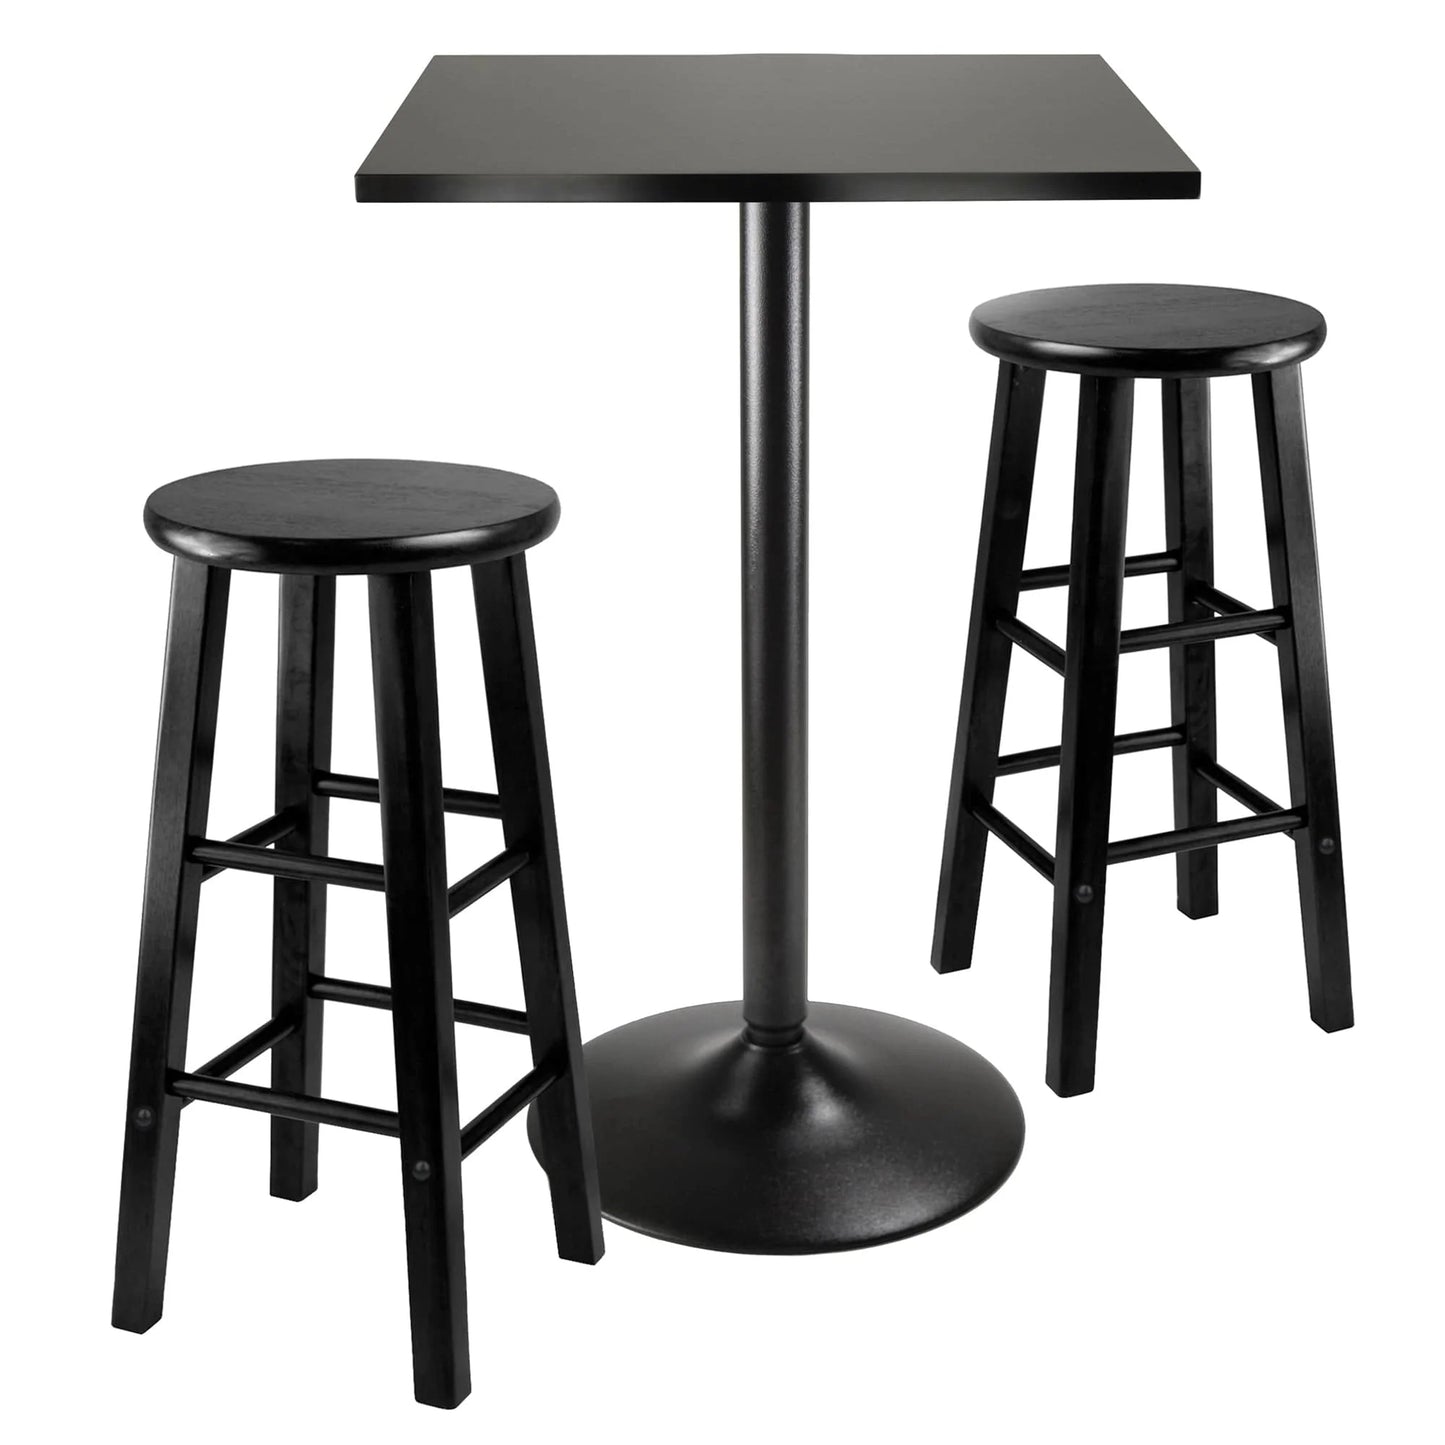 WINSOME Pub Table Set Obsidian 3-Pc Square Pub Table and Round Seat Counter Stools, Black